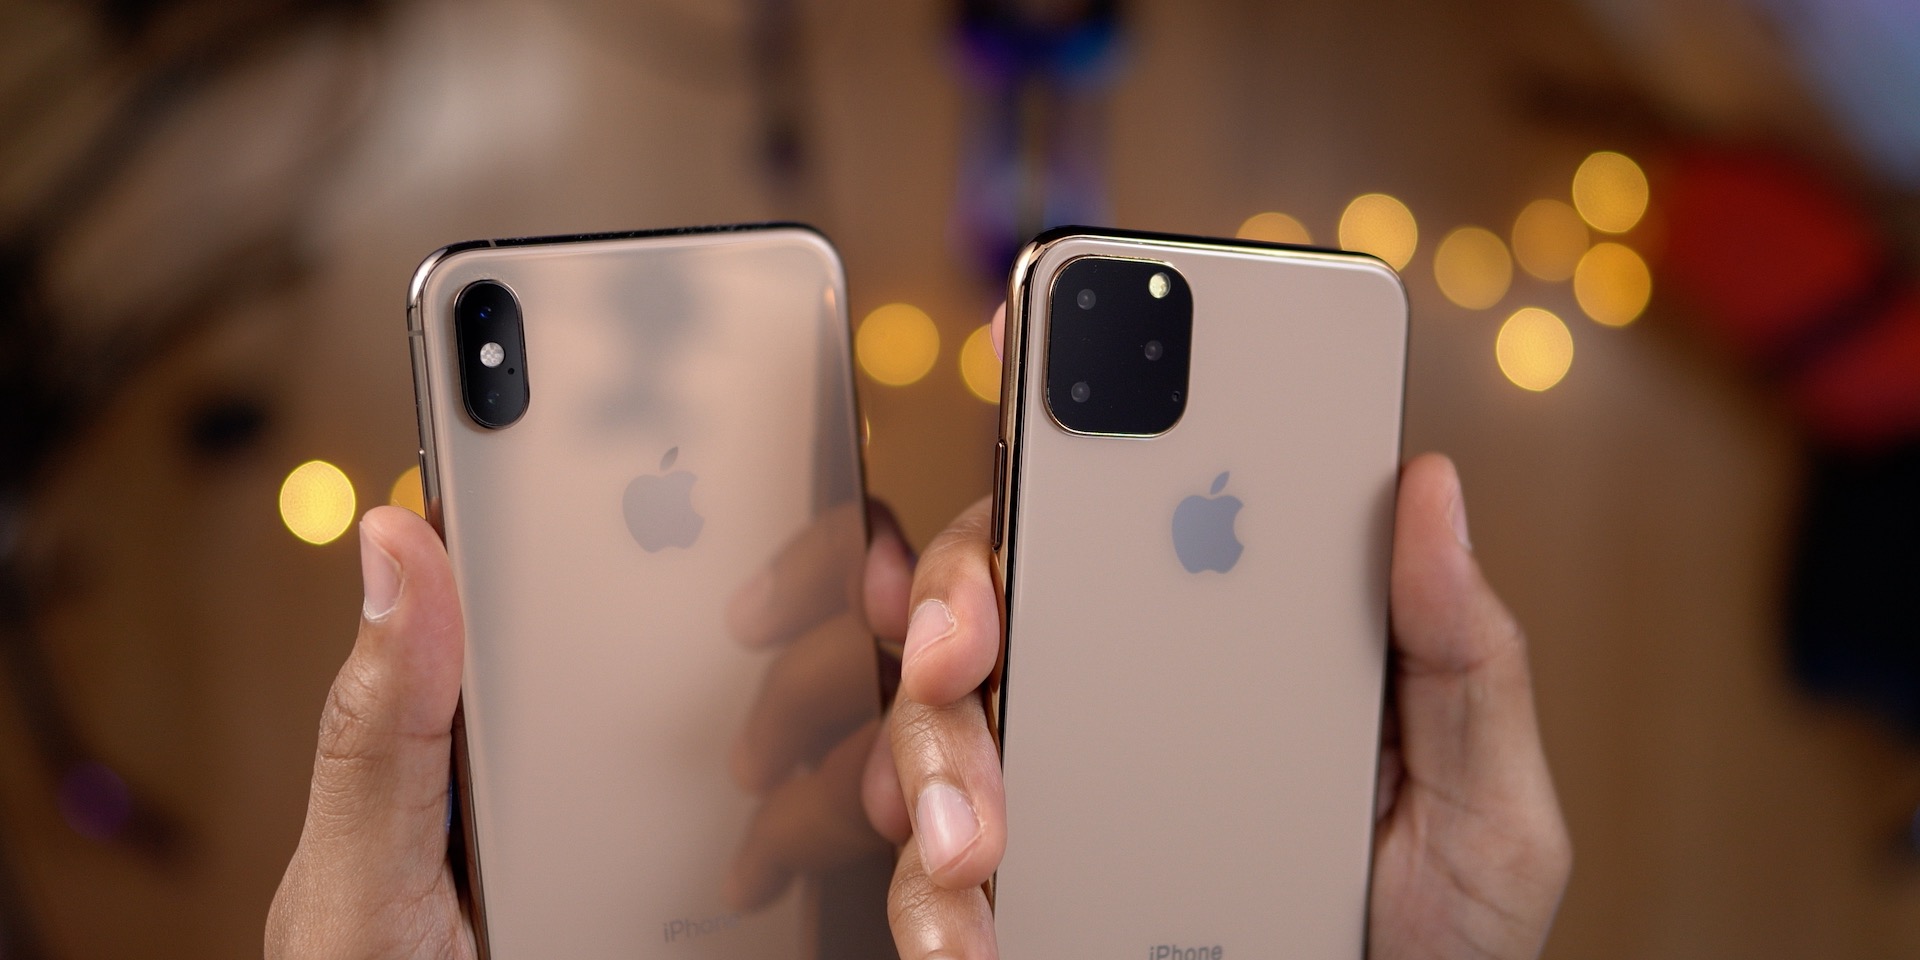 iPhone 11 release slated for September 20th, Softbank hints - 9to5Mac